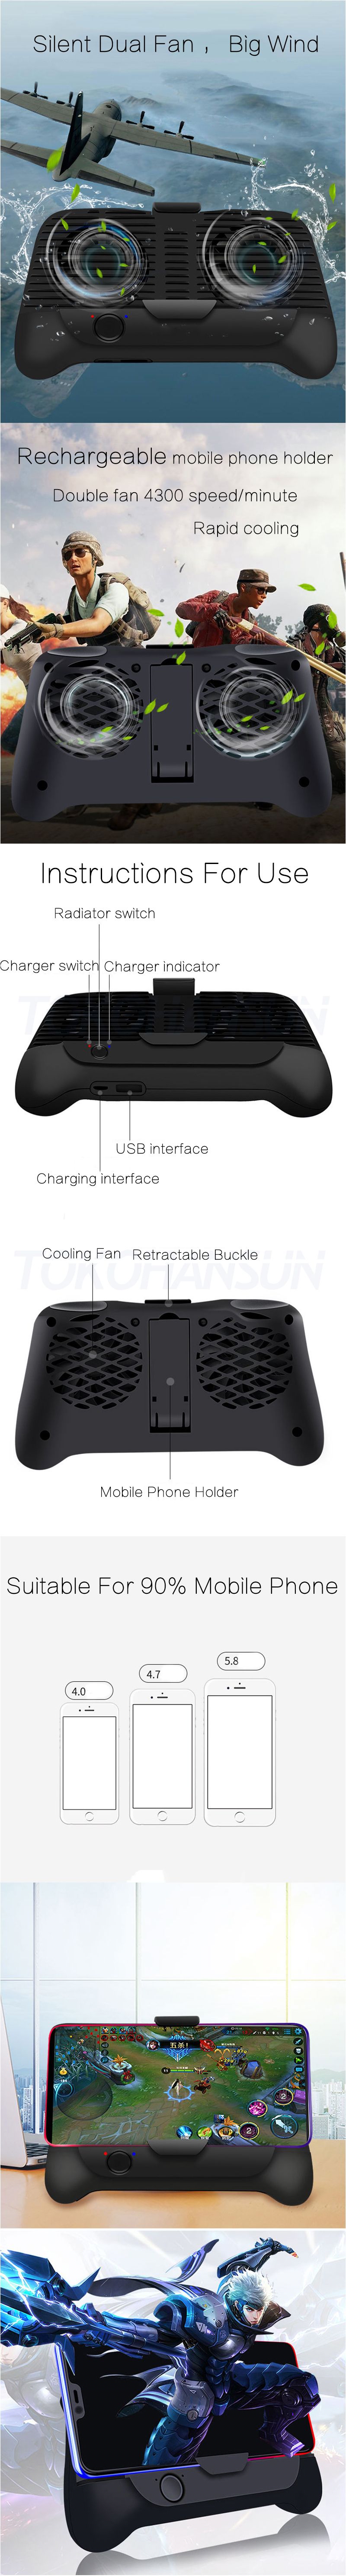 Mobile-Phone-Cooling-Fan-Cooler-Gamepad-Stand-1800-mah-Power-Bank-Mute-Radiator-Fan-for-4-7-inch-Sma-1537823